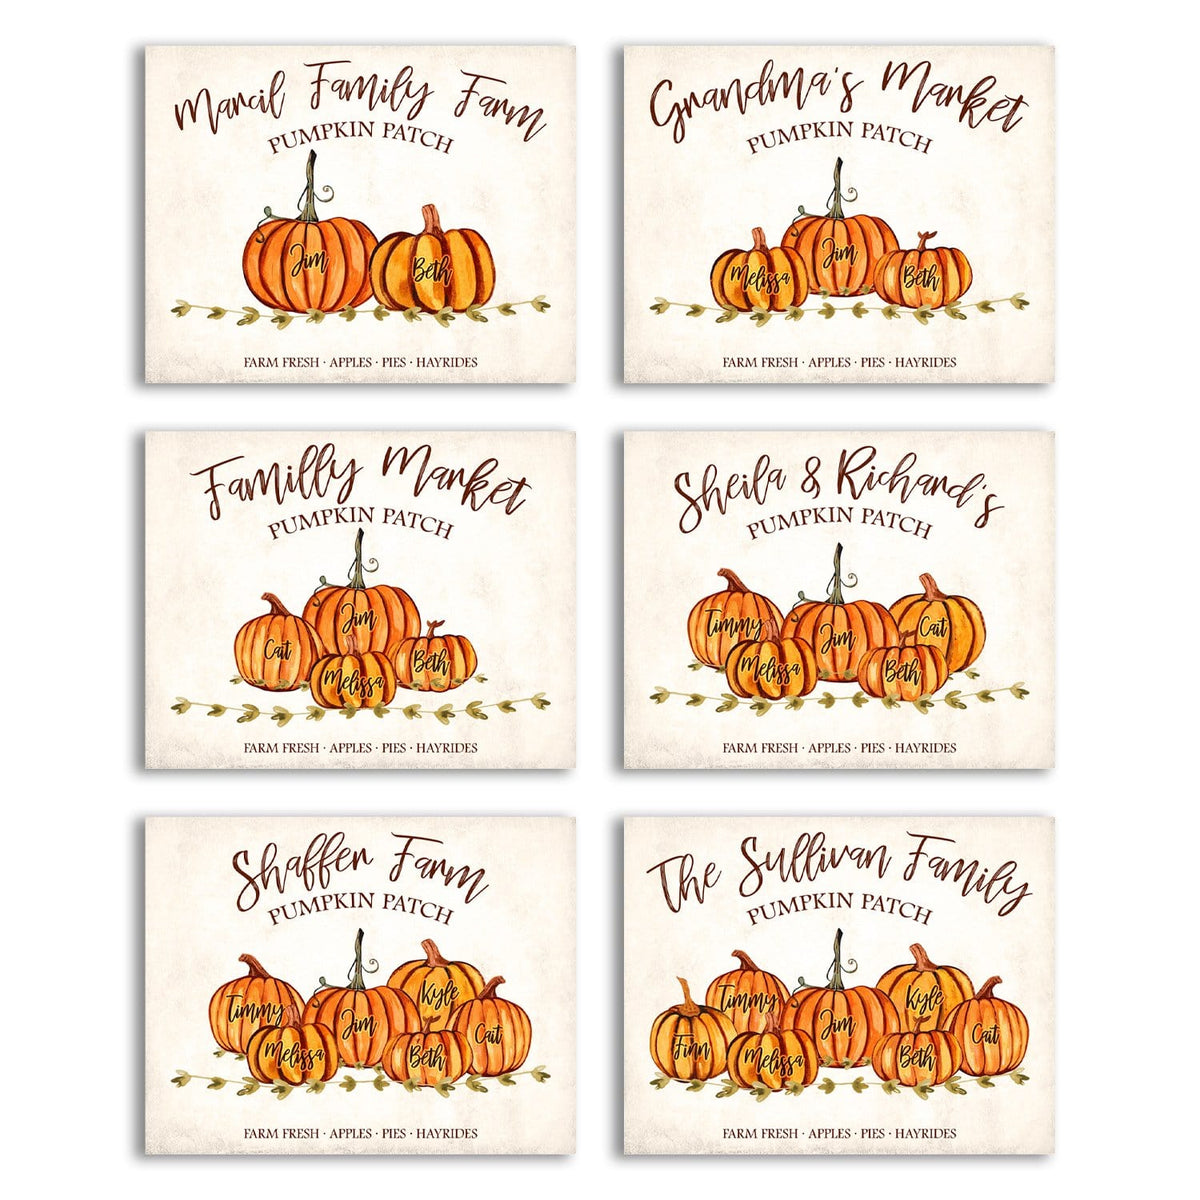 Examples shown of 2-7 pumpkins for your family members